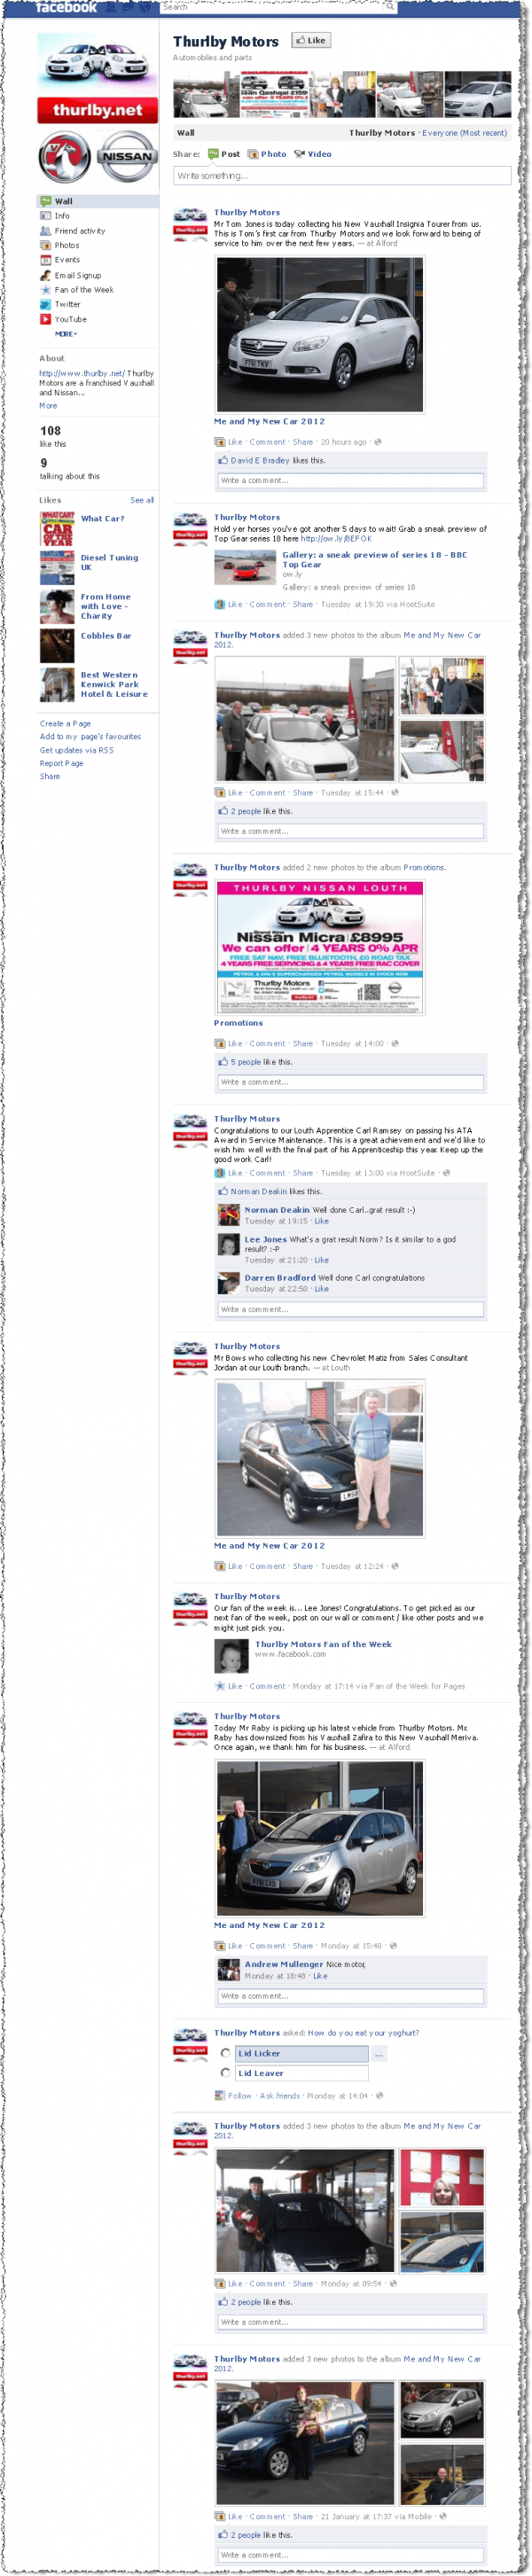 The Thurlby Motors Facebook page